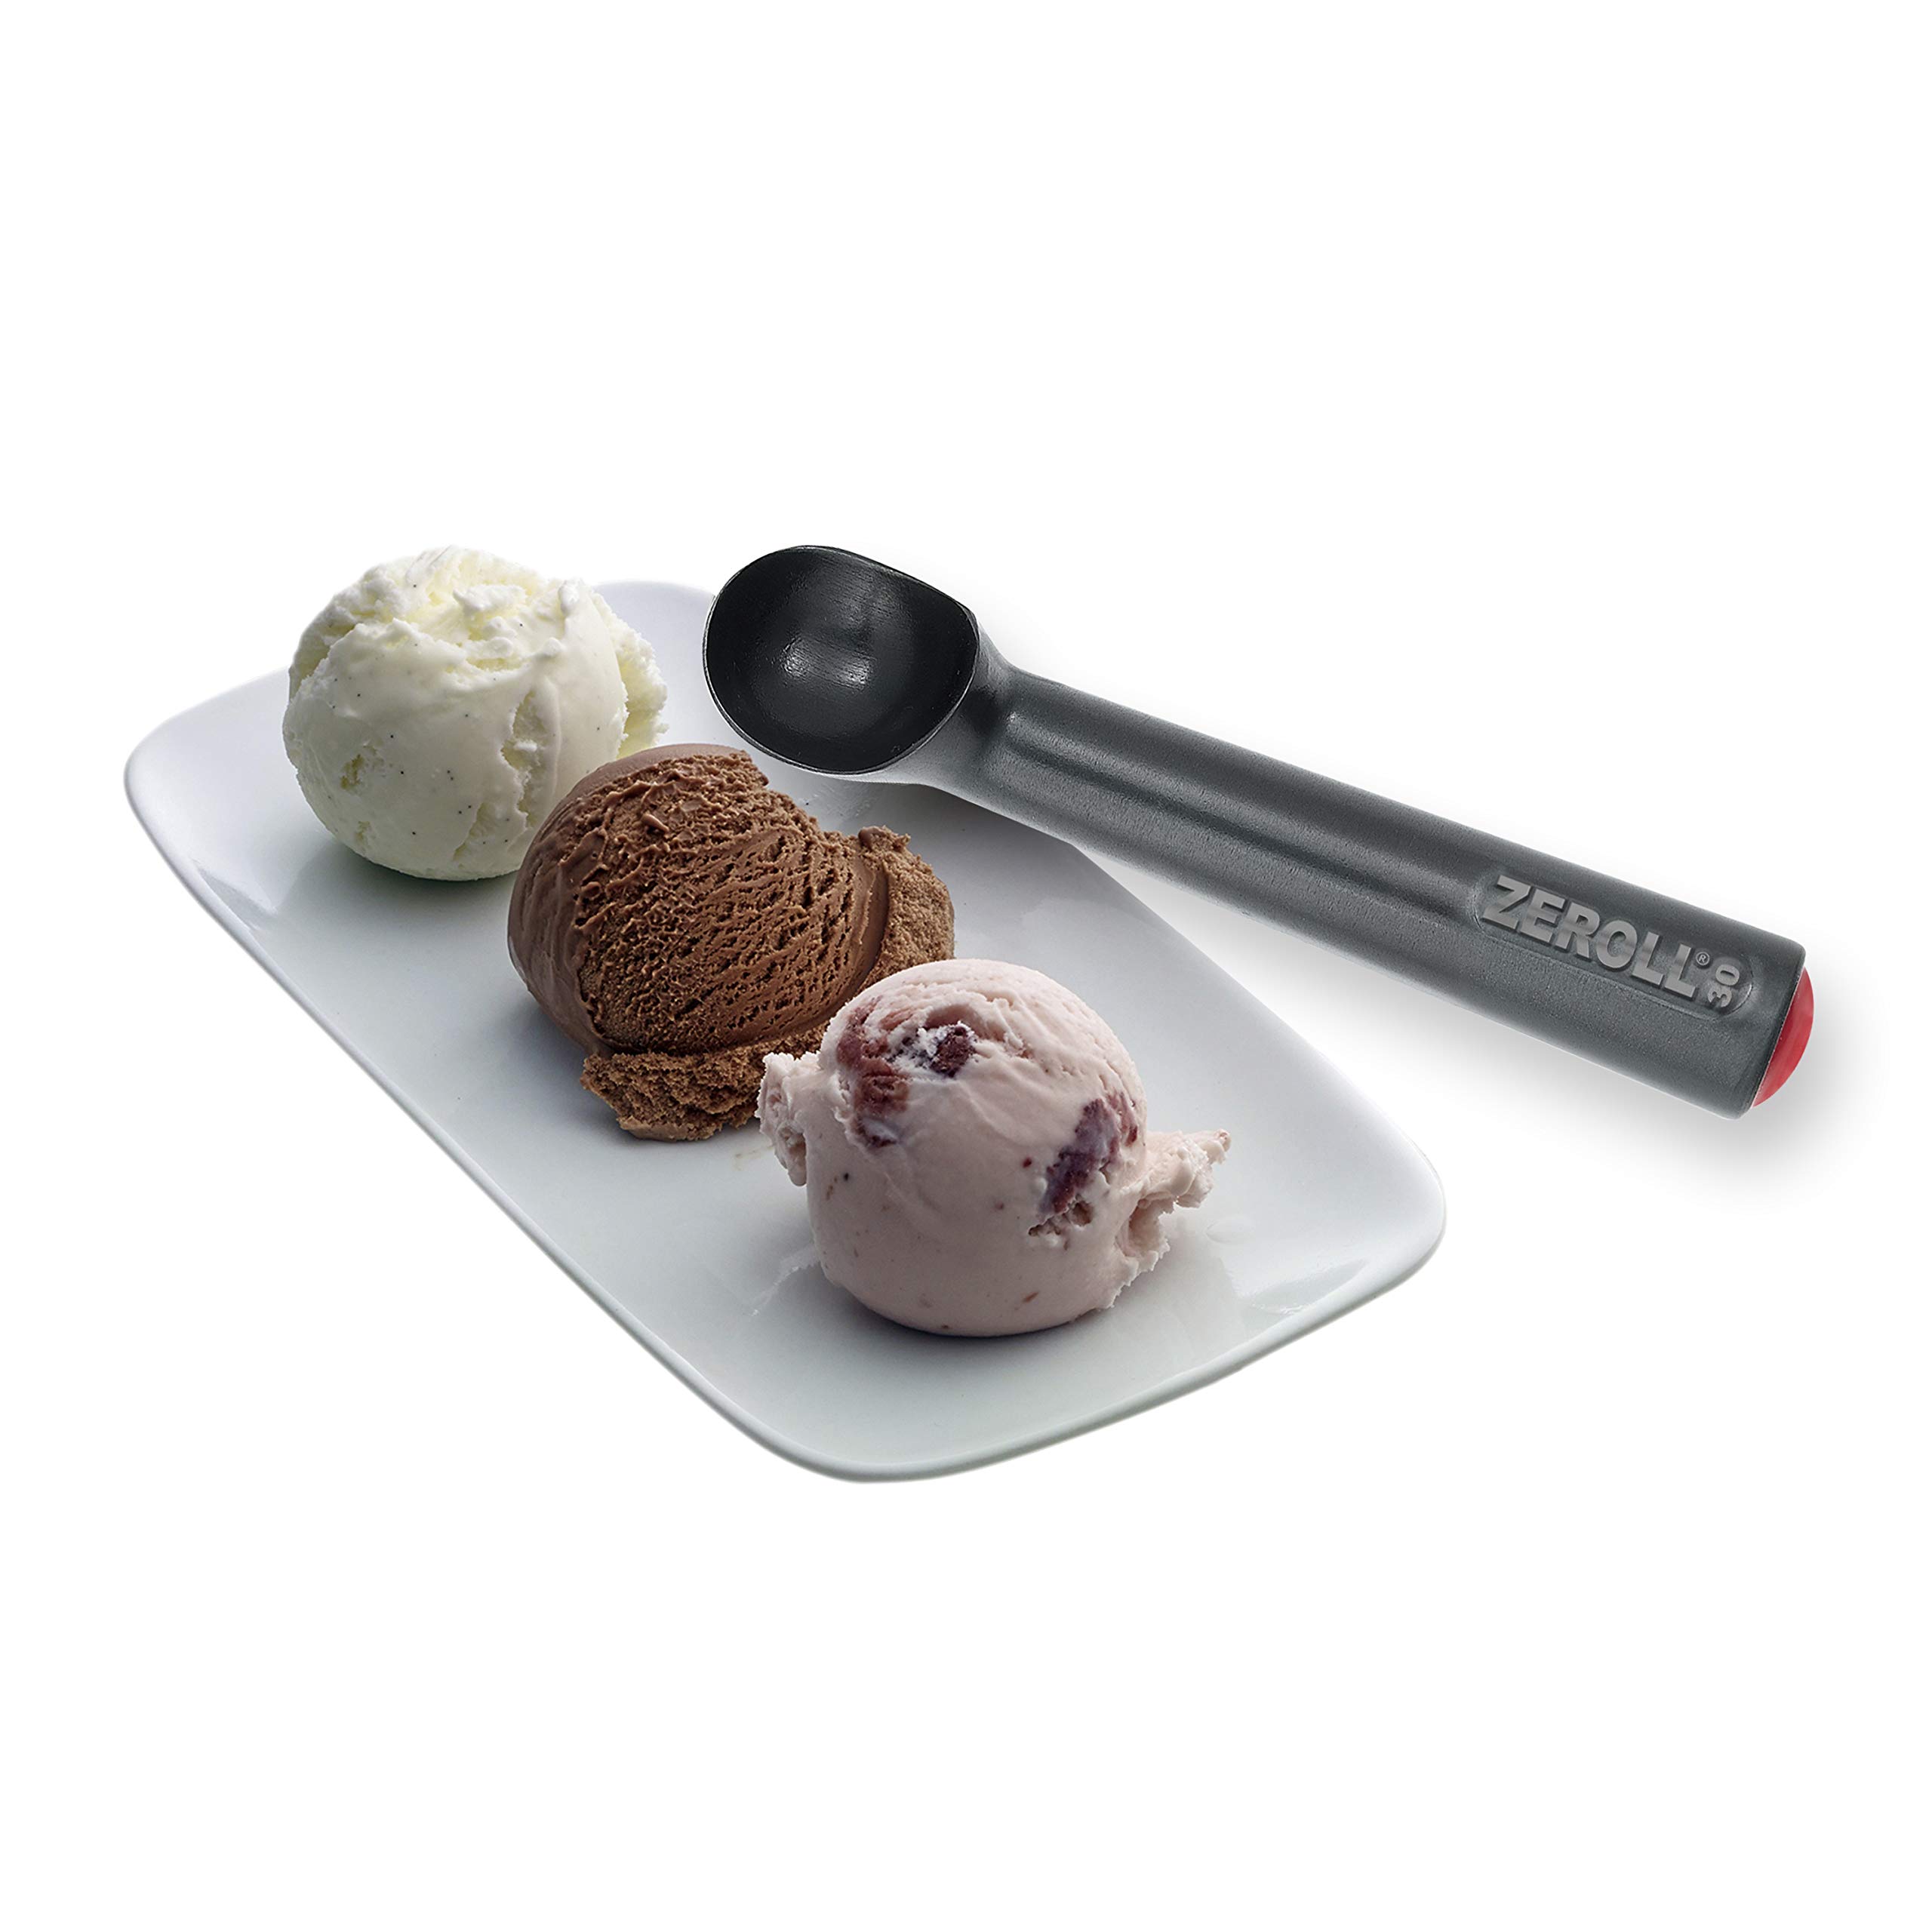 Zeroll Zerolon Hardcoat Anodized Commercial Ice Cream Scoop with Unique Liquid Filled Heat Conductive Handle Easy Release Made in USA, 1-Ounce, Black